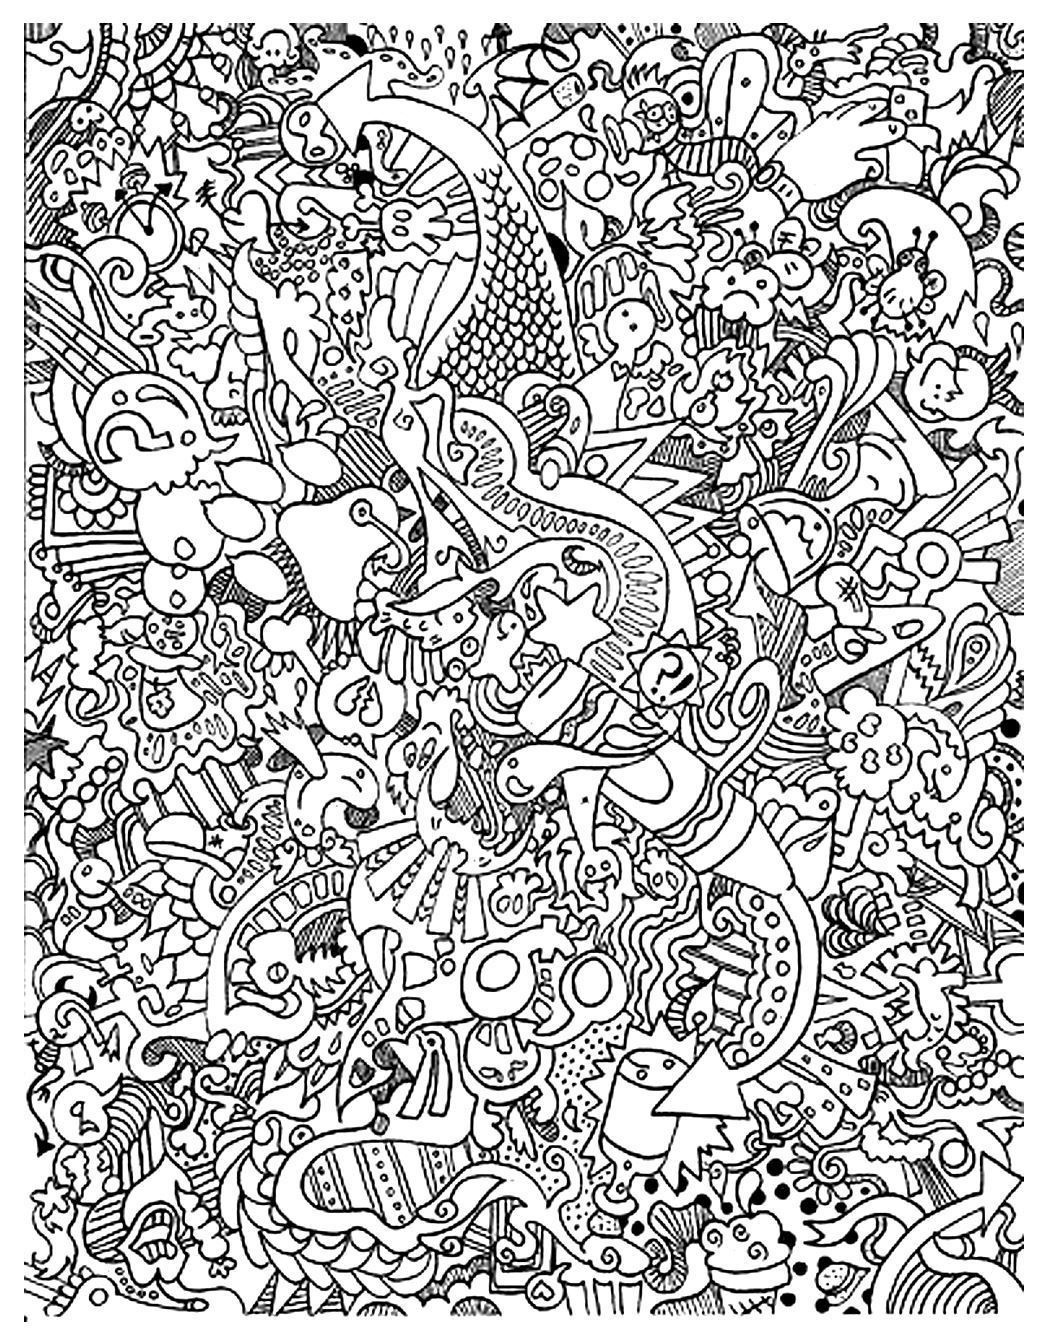 Free Coloring Page Coloring-Doodle-Art-Doodling-15. Funny Doodle Art - Free Printable Doodle Art Coloring Pages